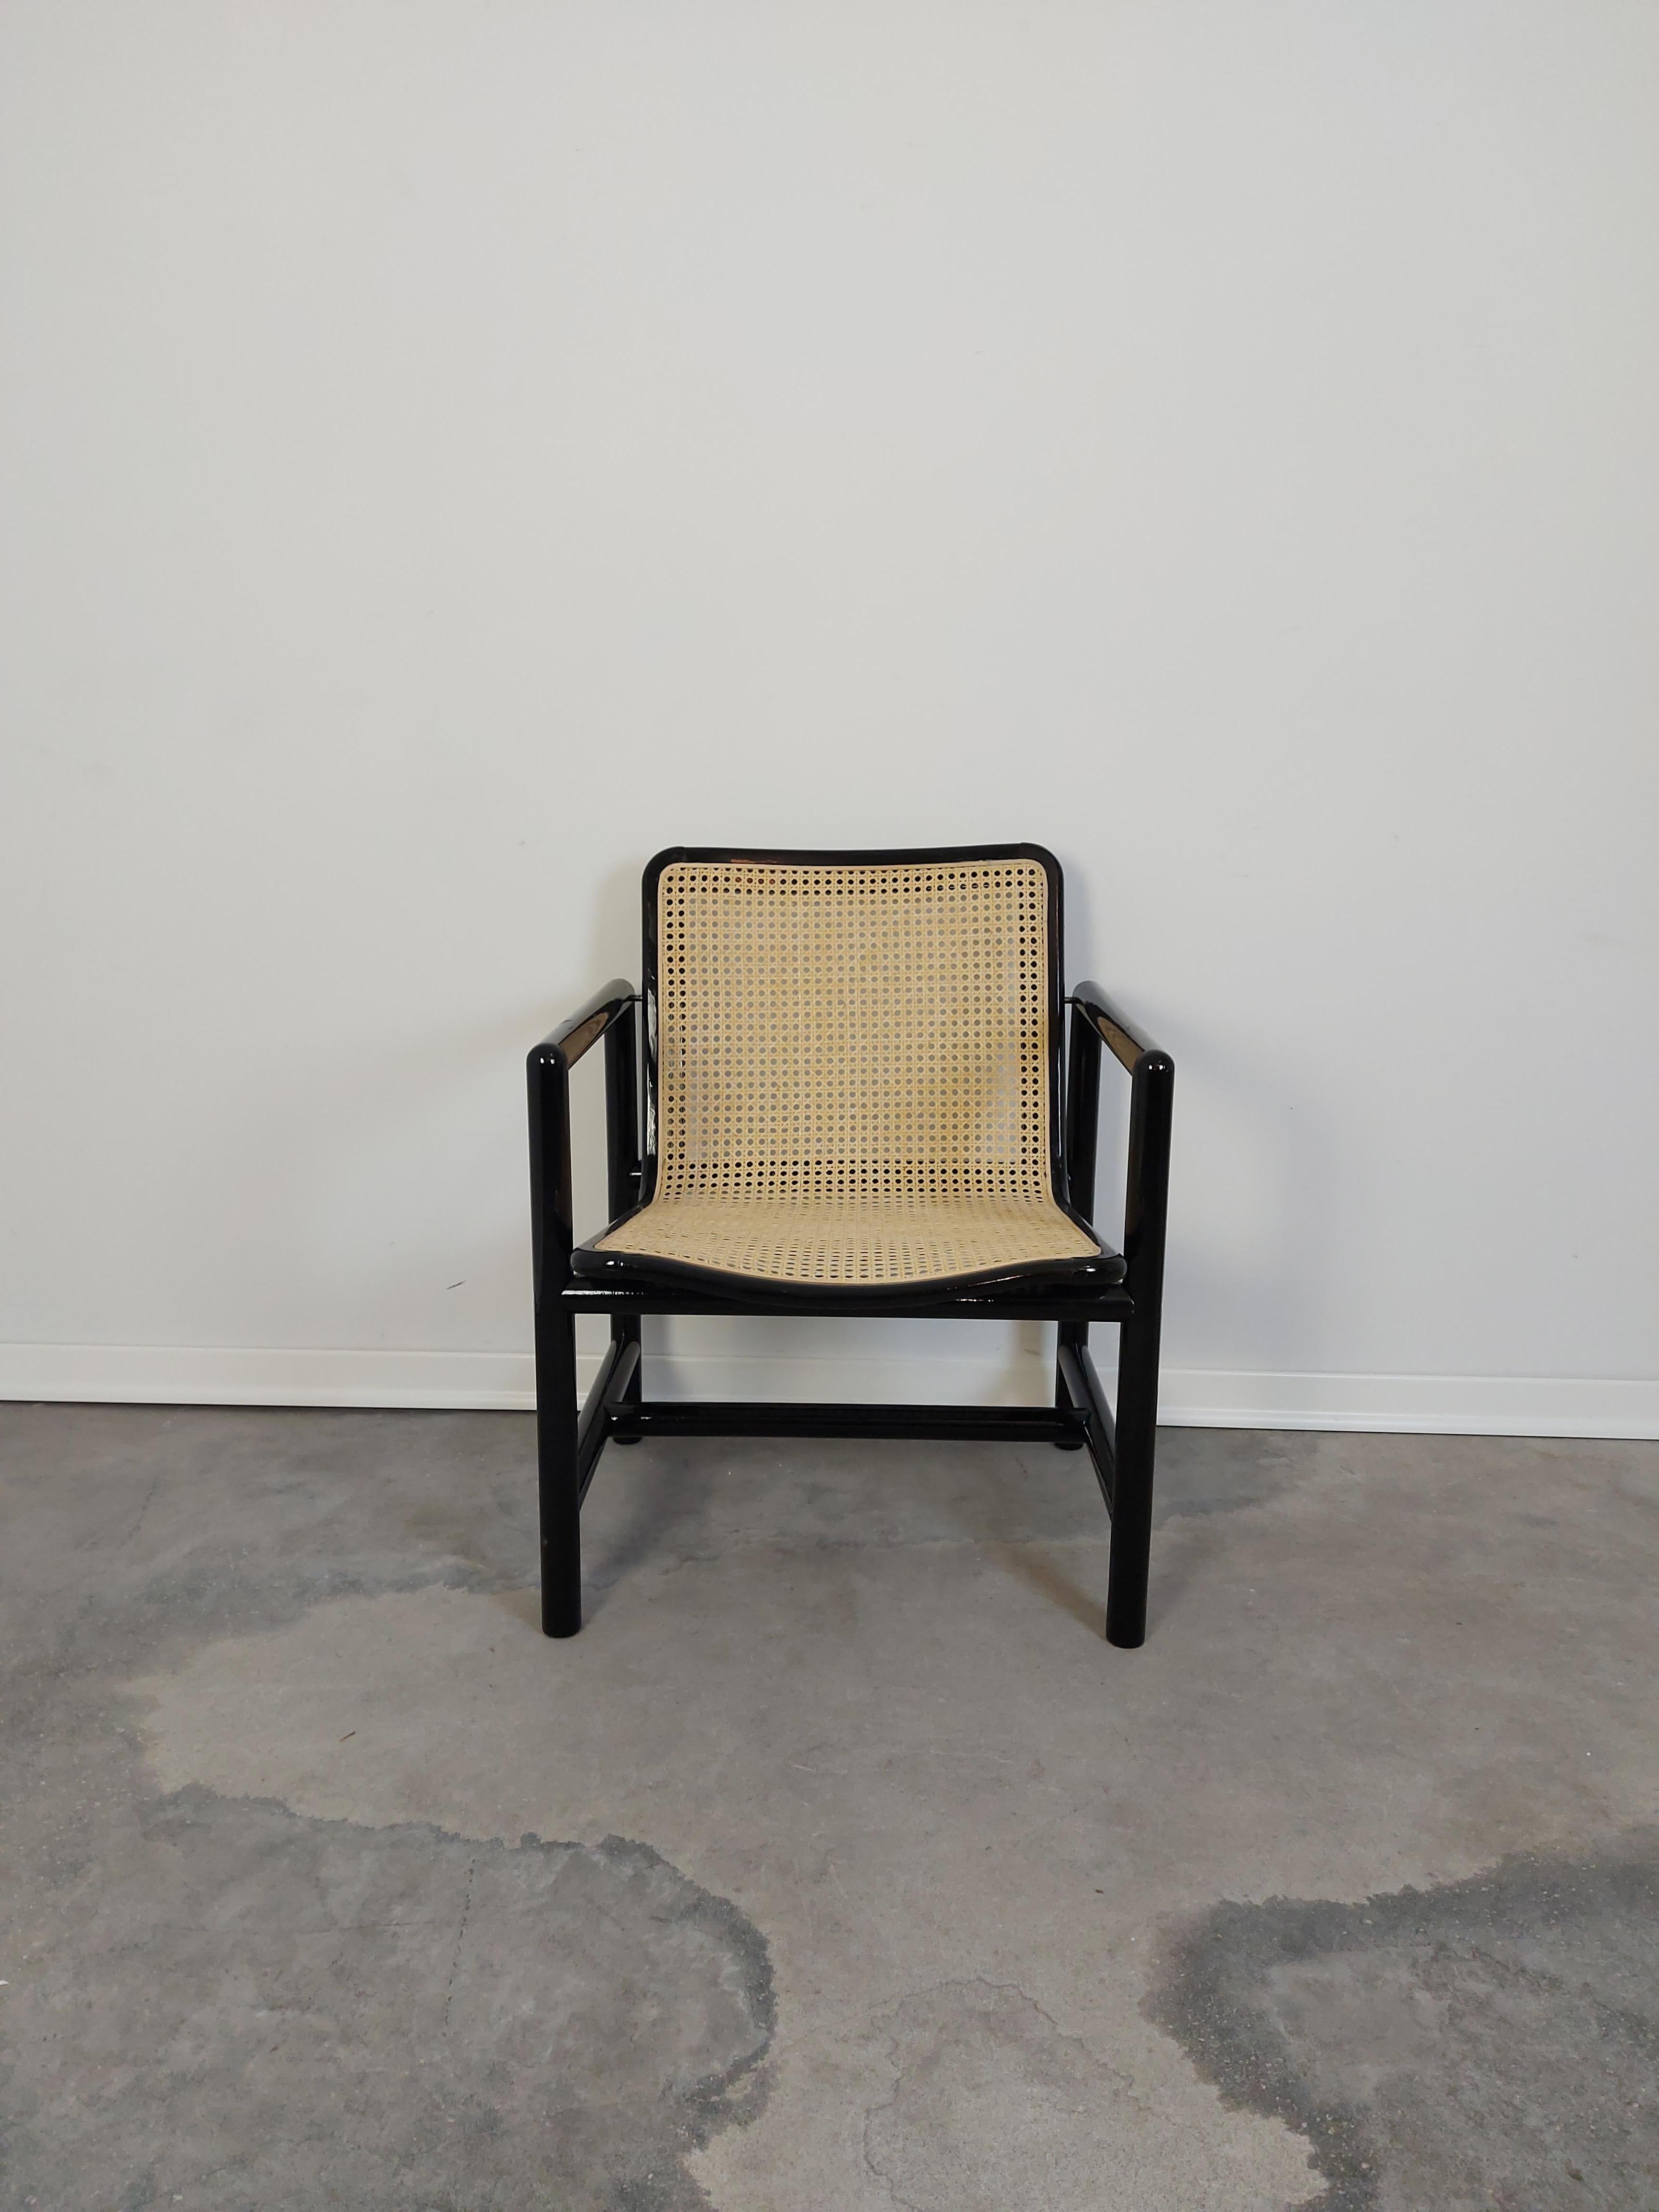 Dining chair produced by Stol Kamnik, Slovenia. Age: 1980s. It is made of a wooden frame painted in black with glossy finish and a brown cane seat. The chair was designed by Slovenian designer Branko Ursic in 1982 and produced by Stol Kamnik. The